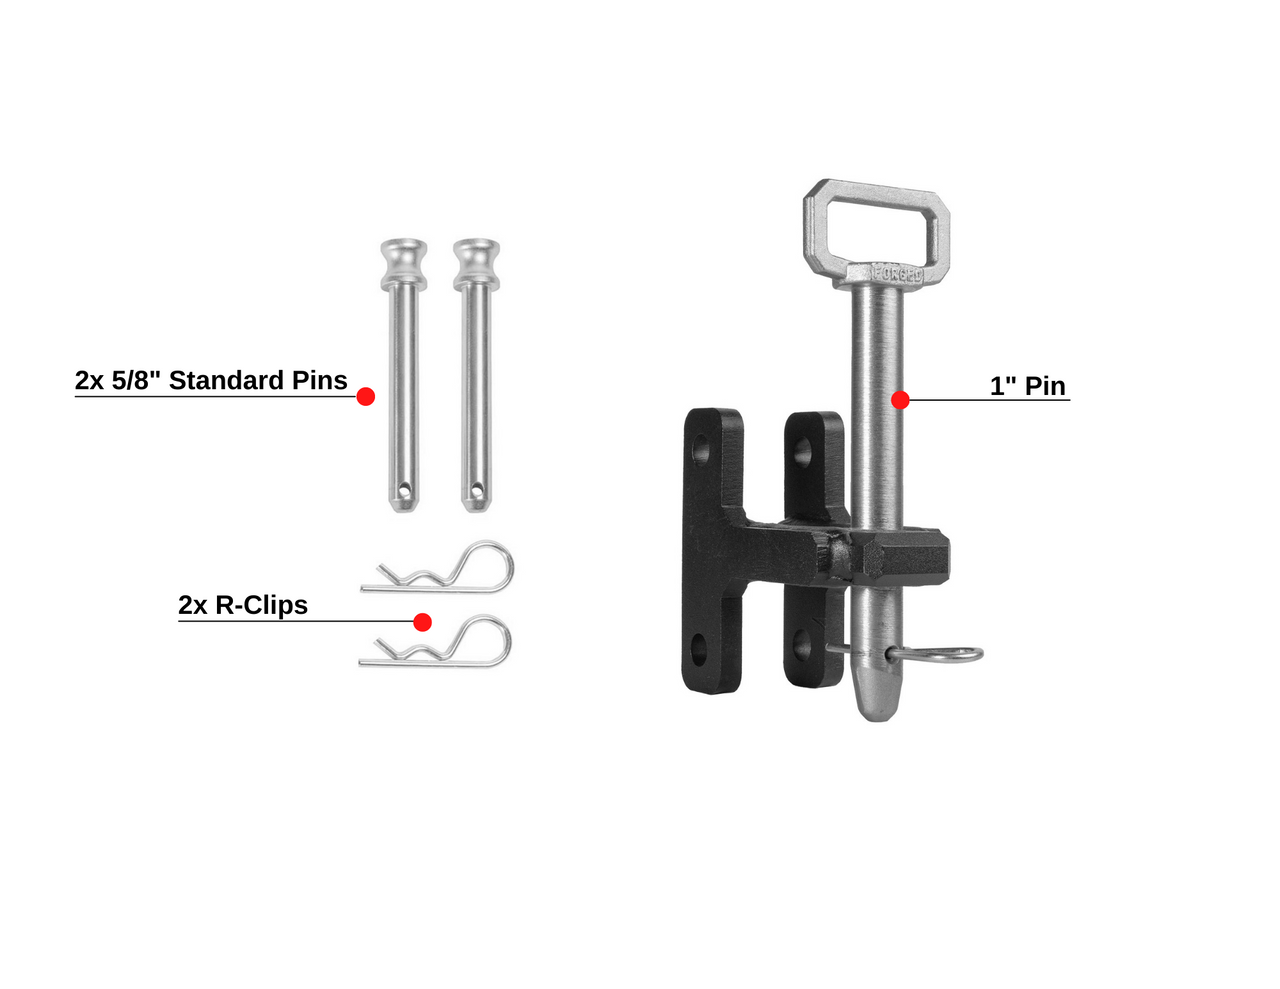 BulletProof Heavy Duty Single Tang Clevis With 1" Pin